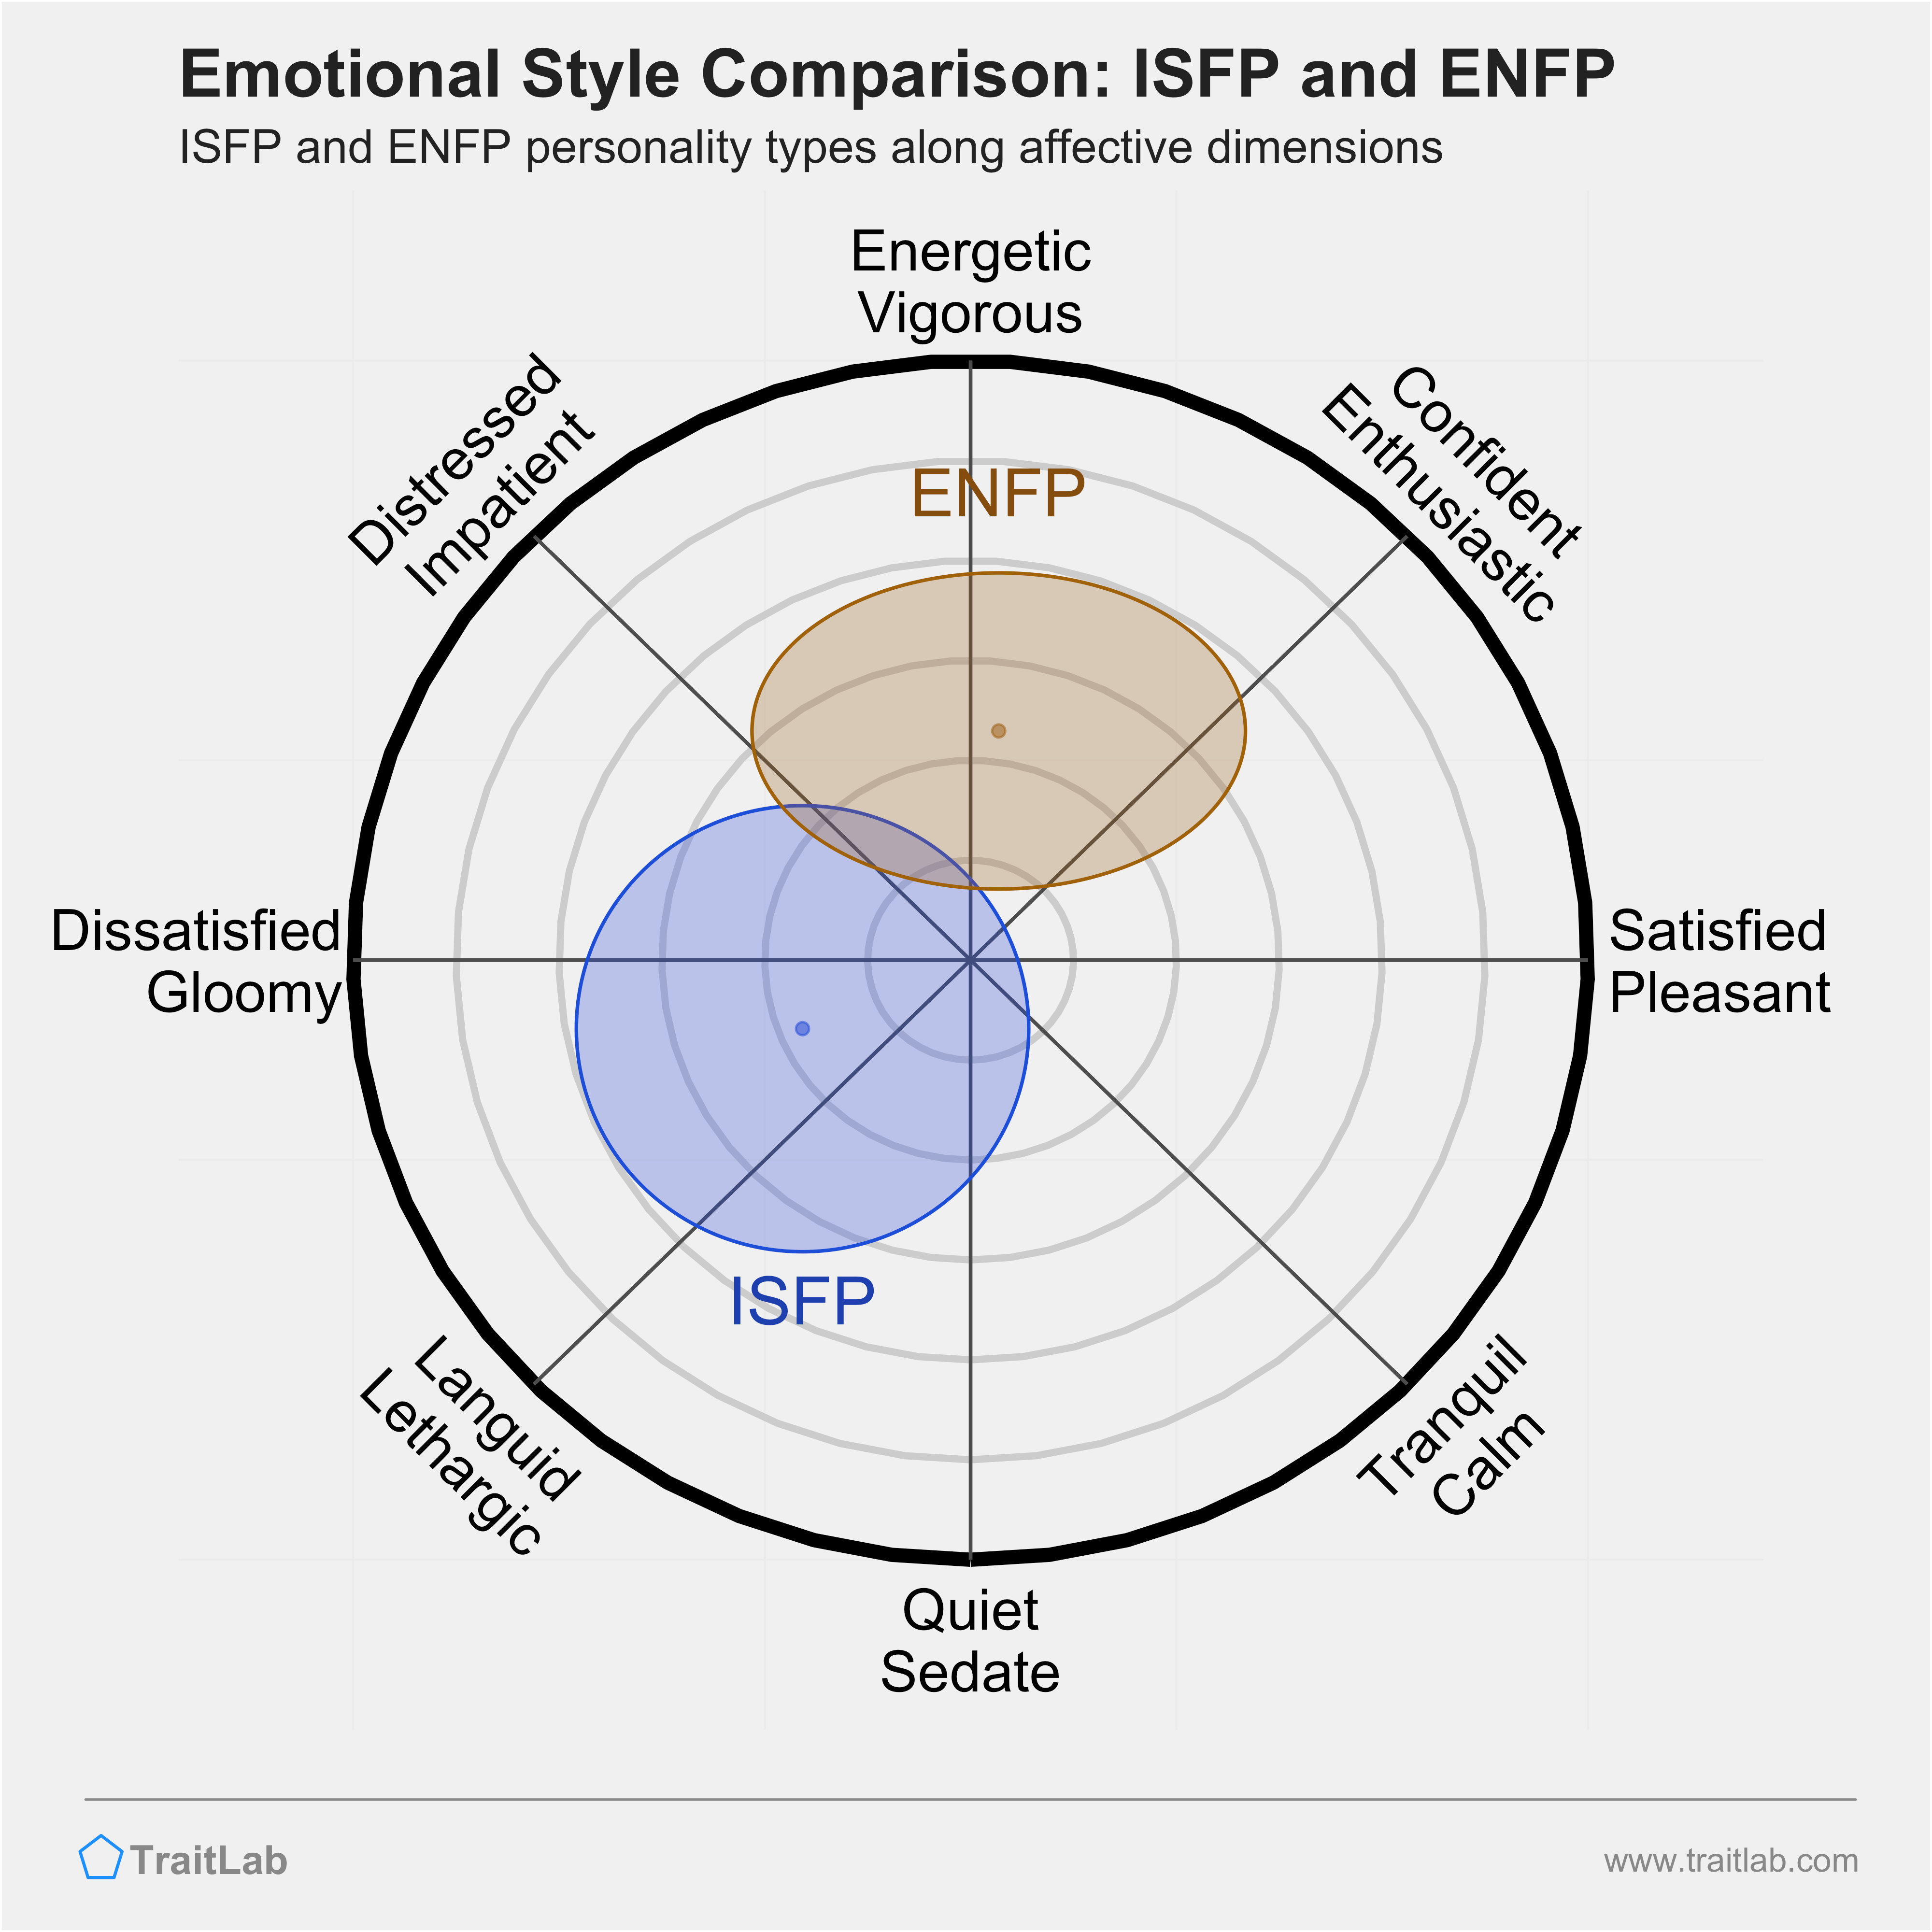 ISFP and ENFP comparison across emotional (affective) dimensions